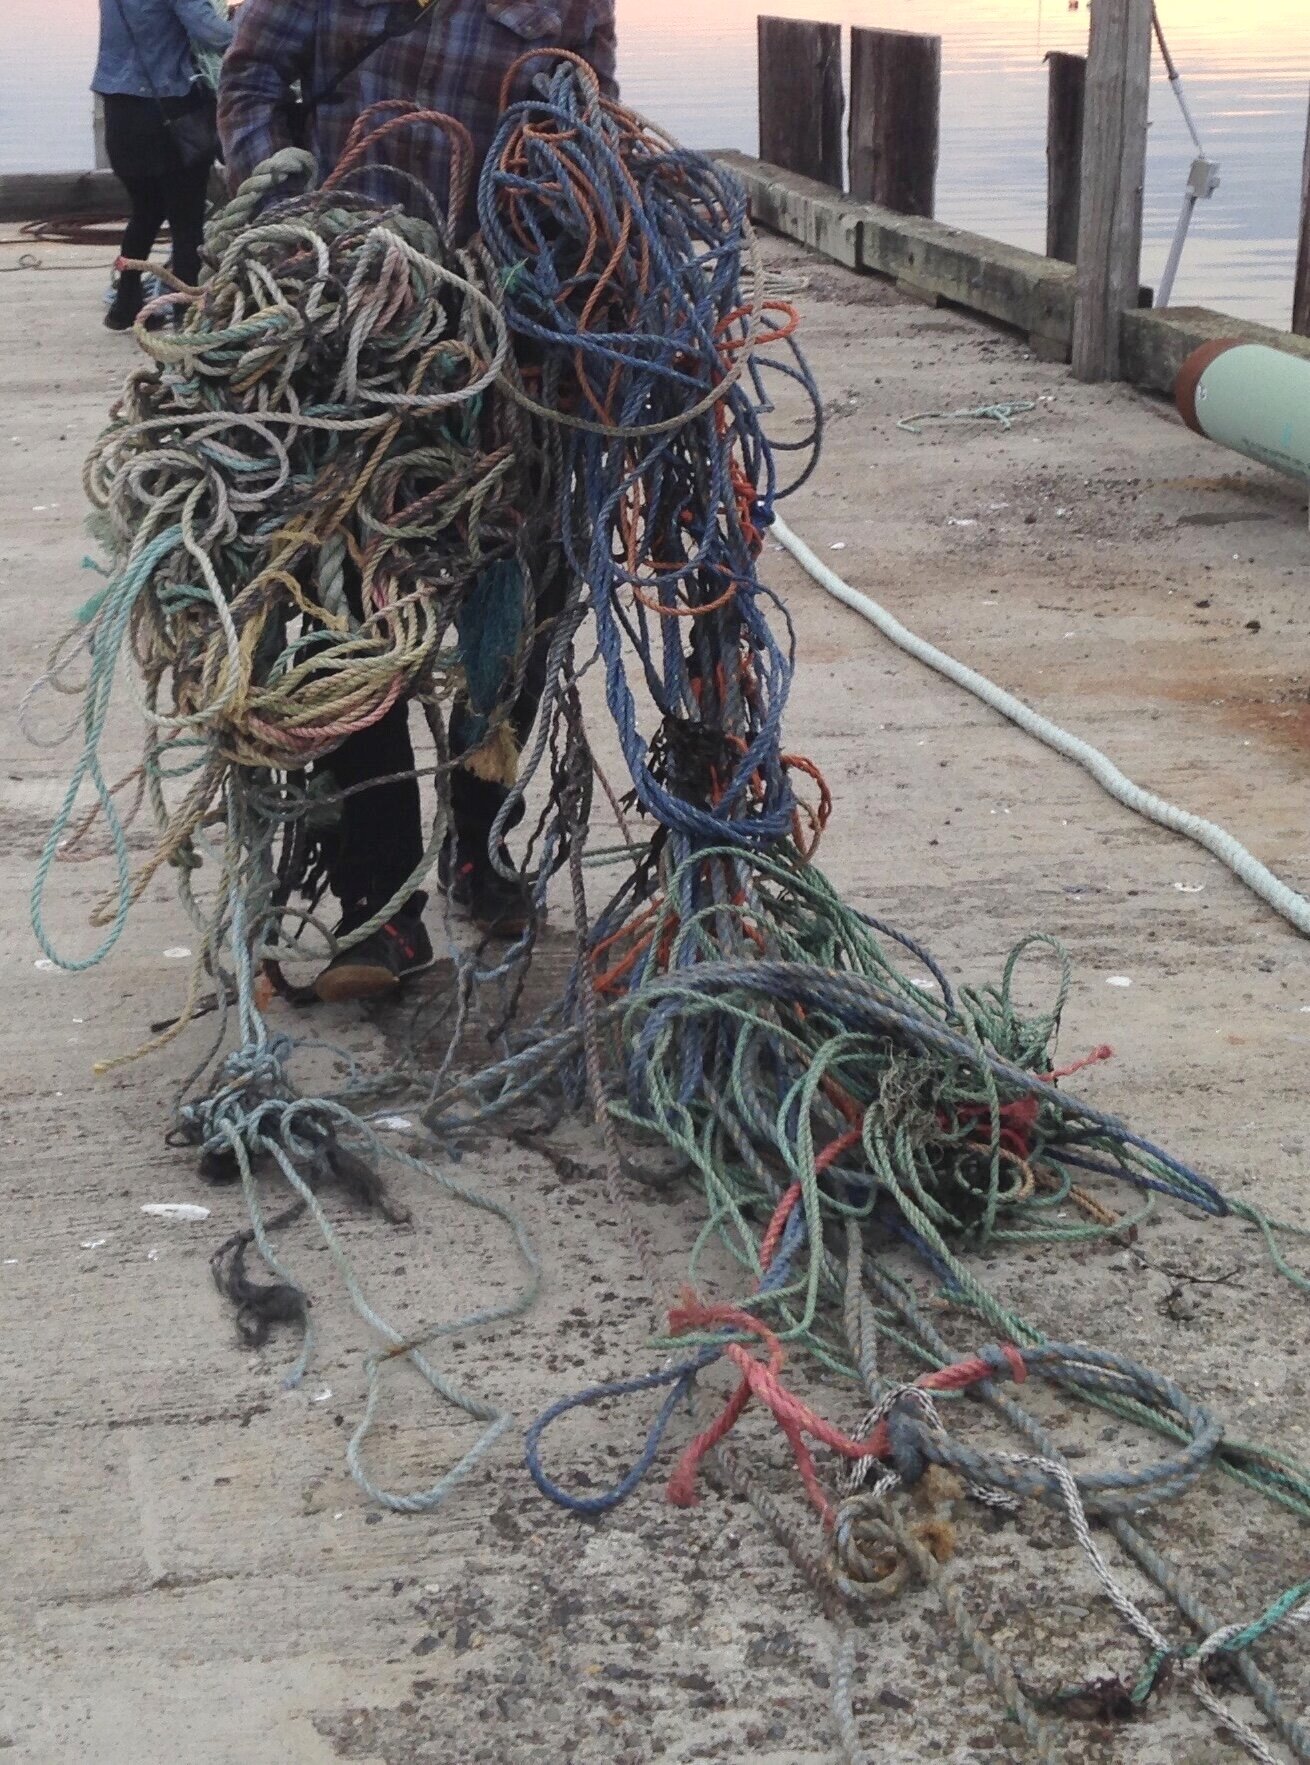  BJM was interested in repurposing this beautiful collected trash as a medium for art. It became a treasure hunt, dancing with the tide, searching the shores and under docks; pulling up all sizes and colors of rope out of rocks and water. He then bro